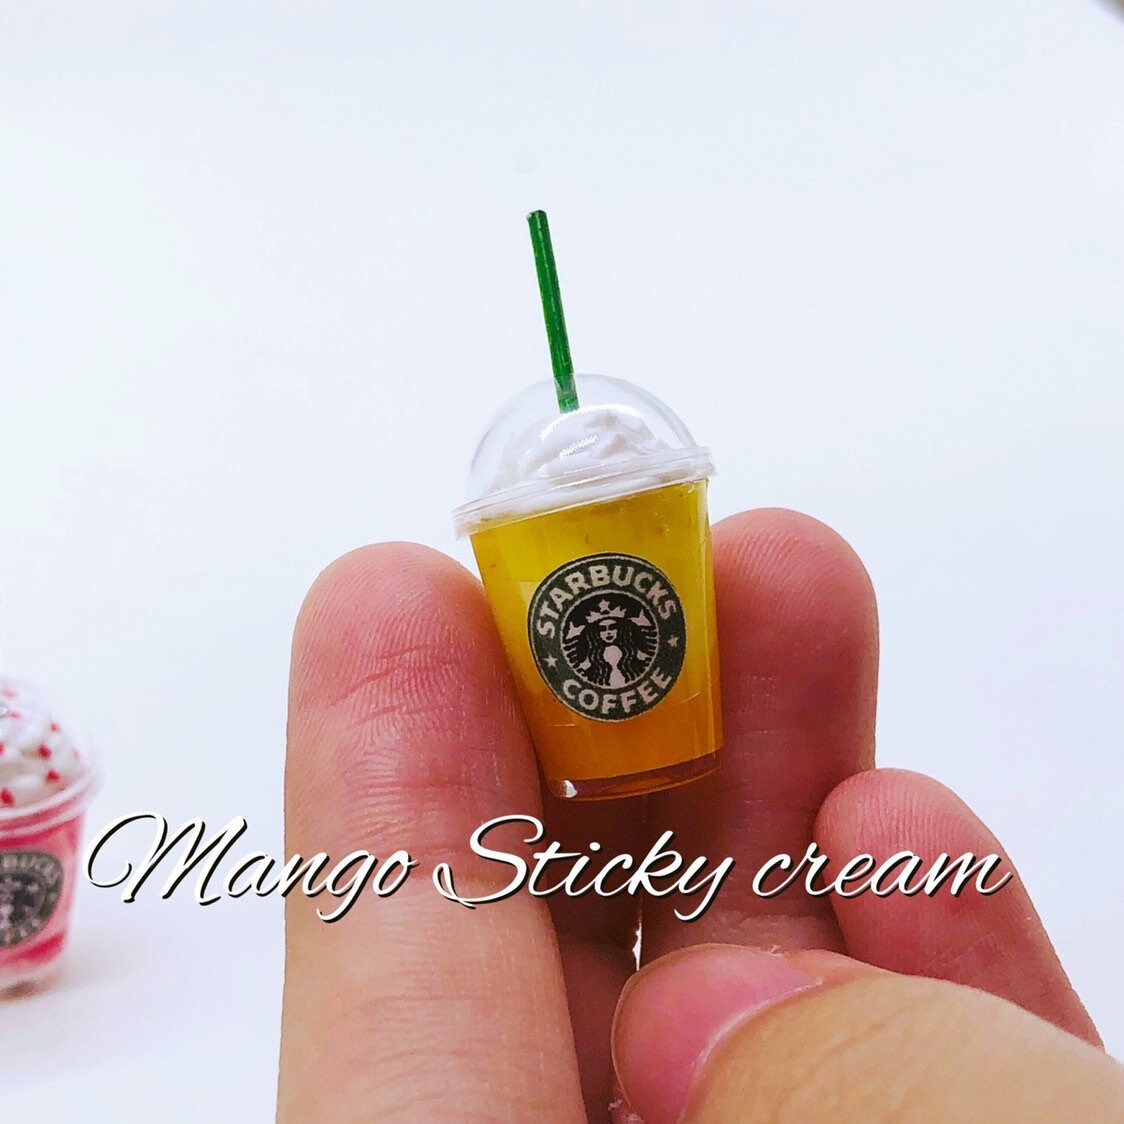 RC 1/10 Scale Accessories STARBUCKS Drink (2)